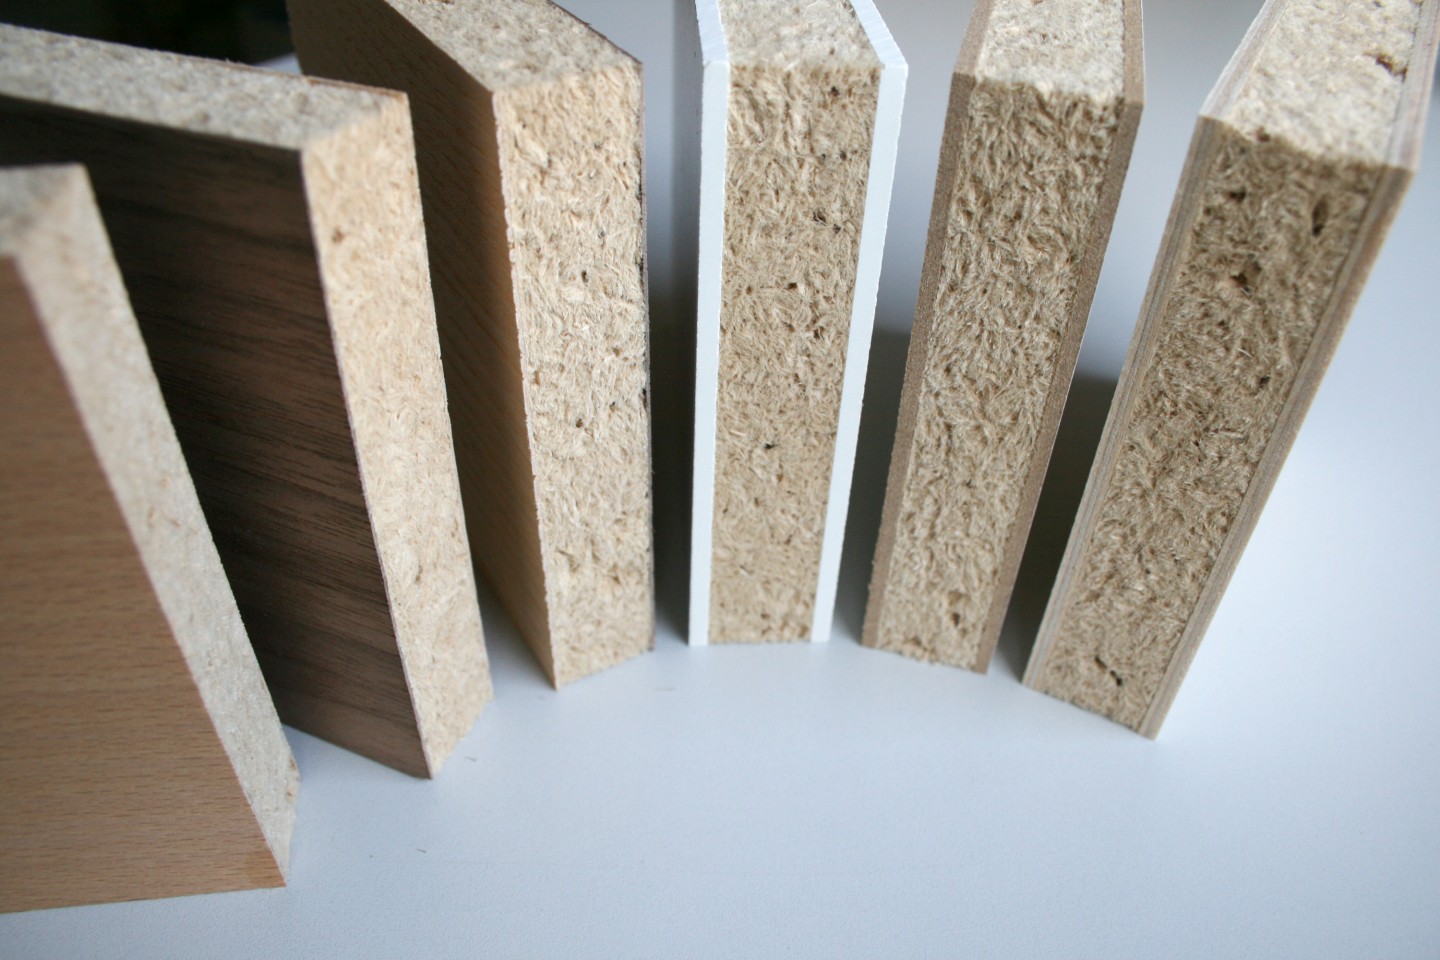 The picture shows six hybrid materials with wood-foam cores. They all have a wood-foam core and a thin top layer on both sides. The top layers are each made of a different material, for example, beech veneer or fiberboard.